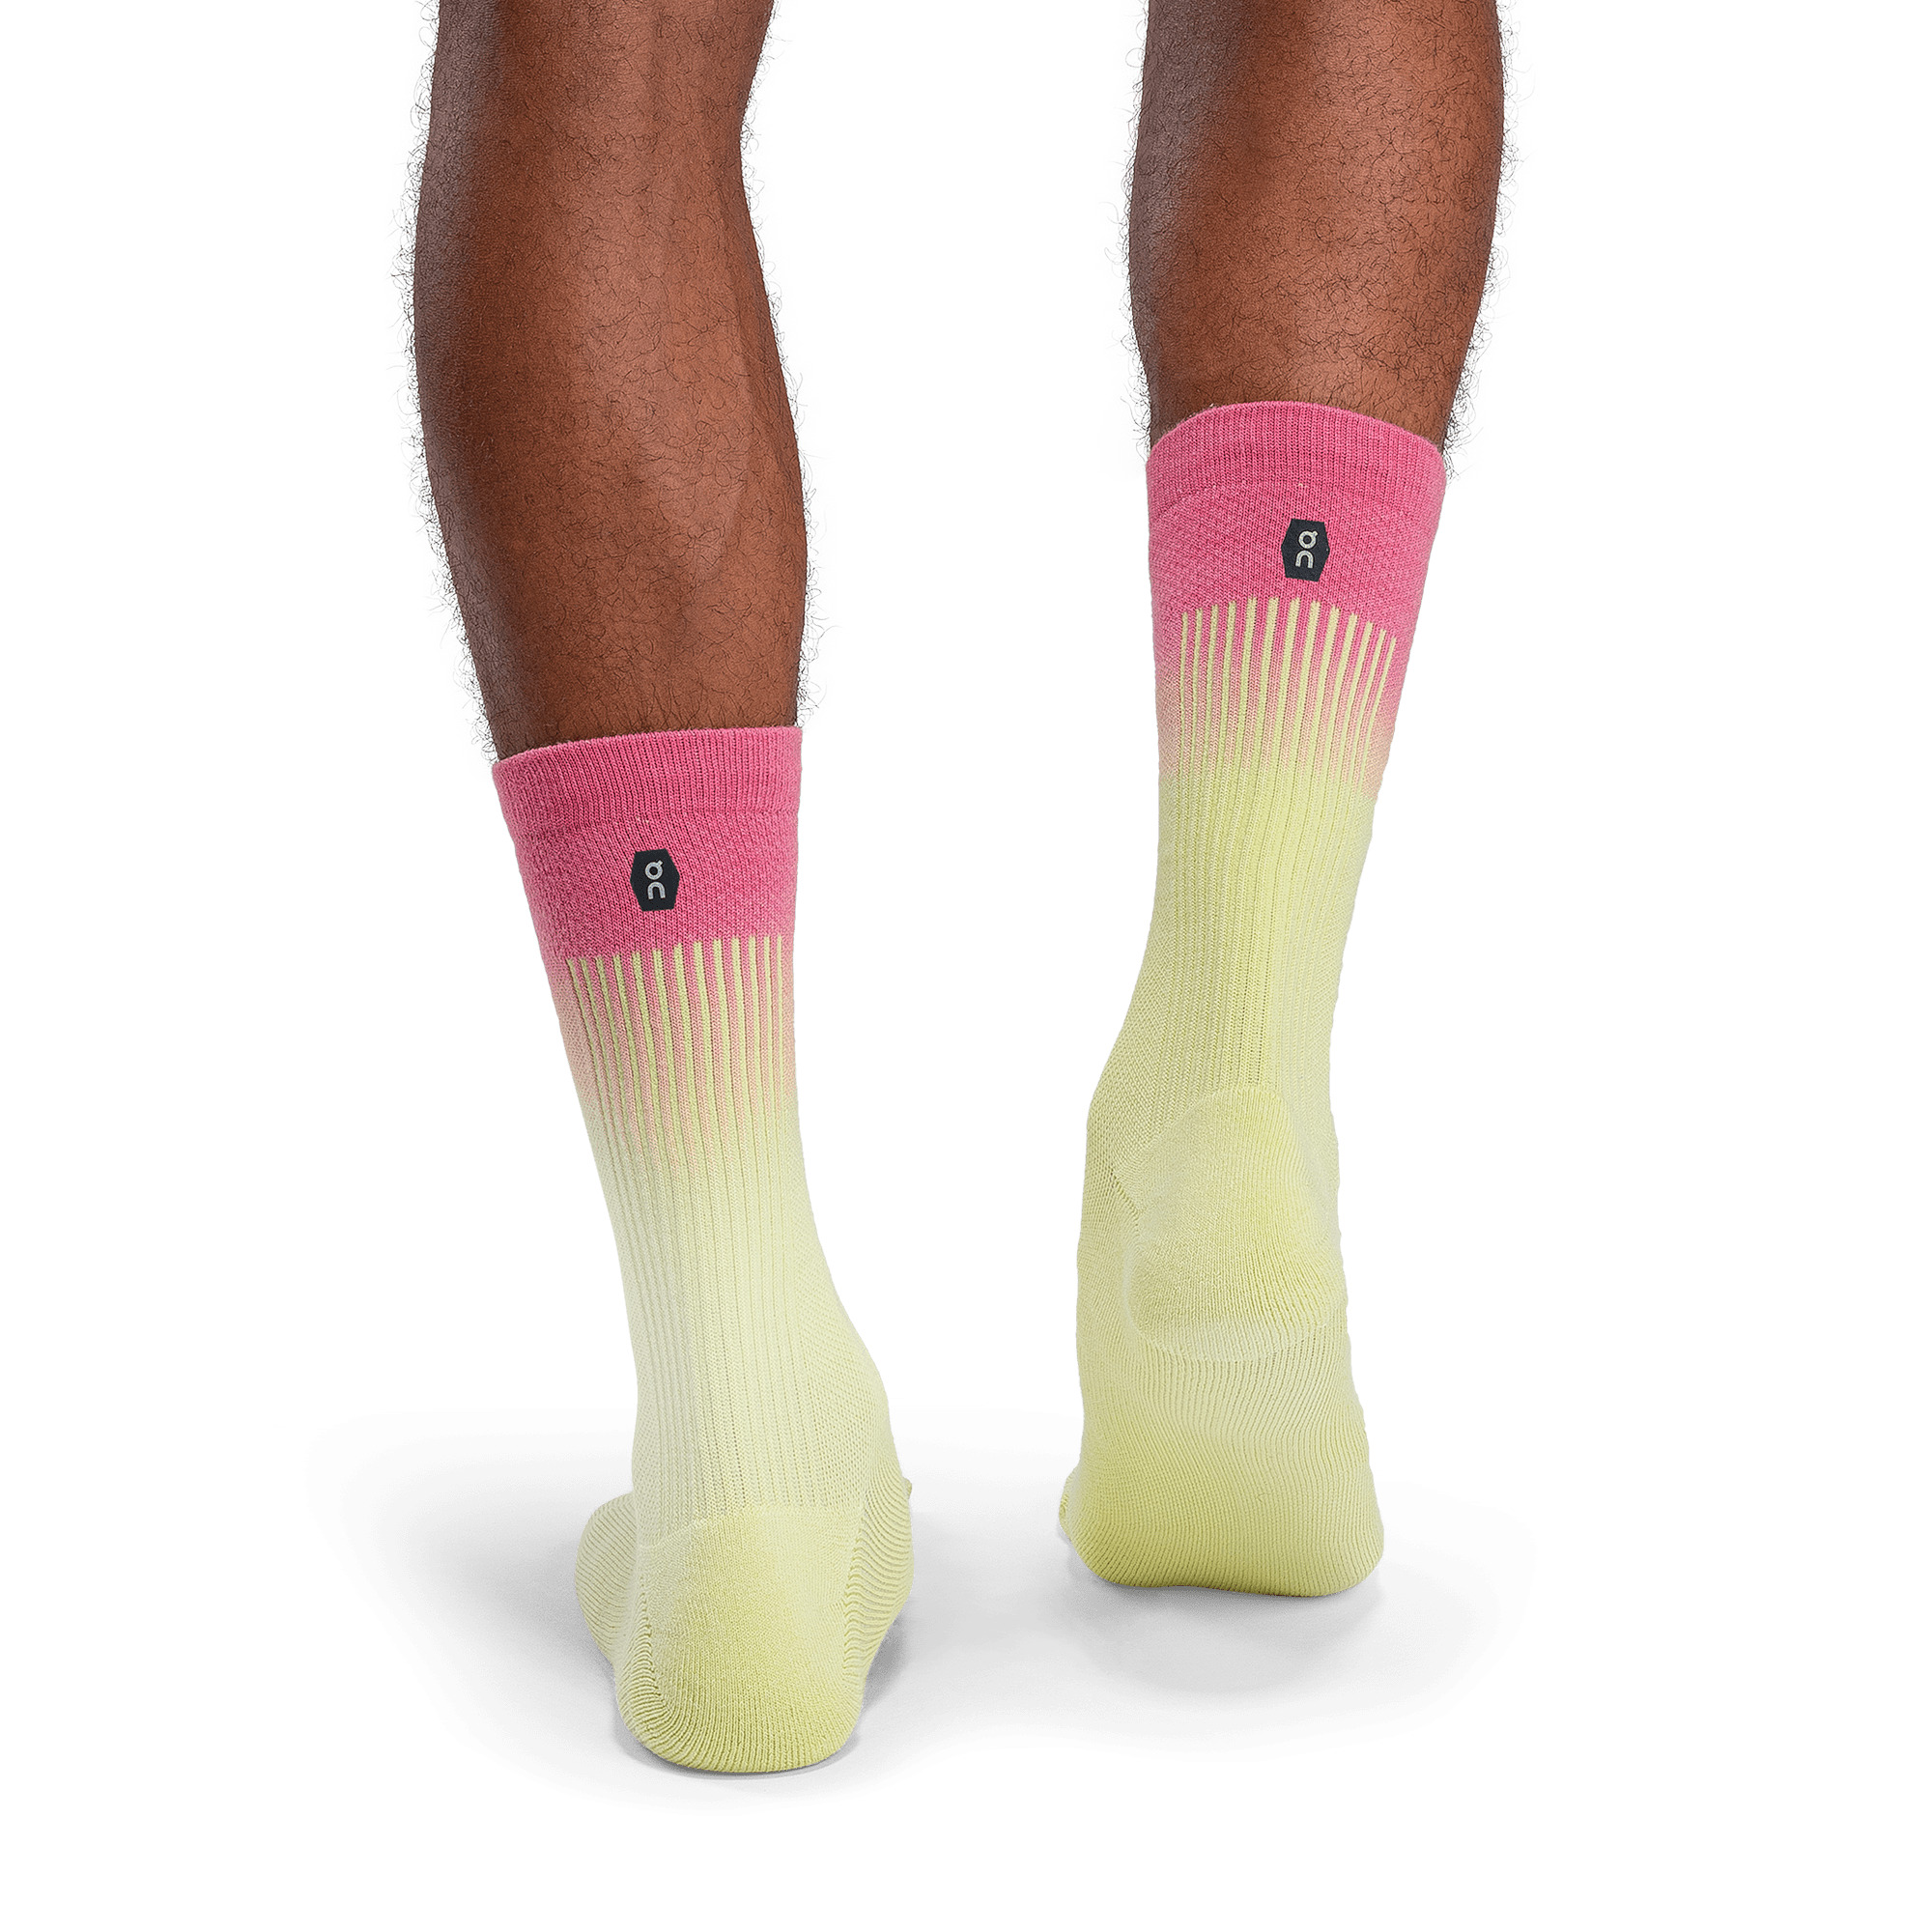 All-Day Sock - 3